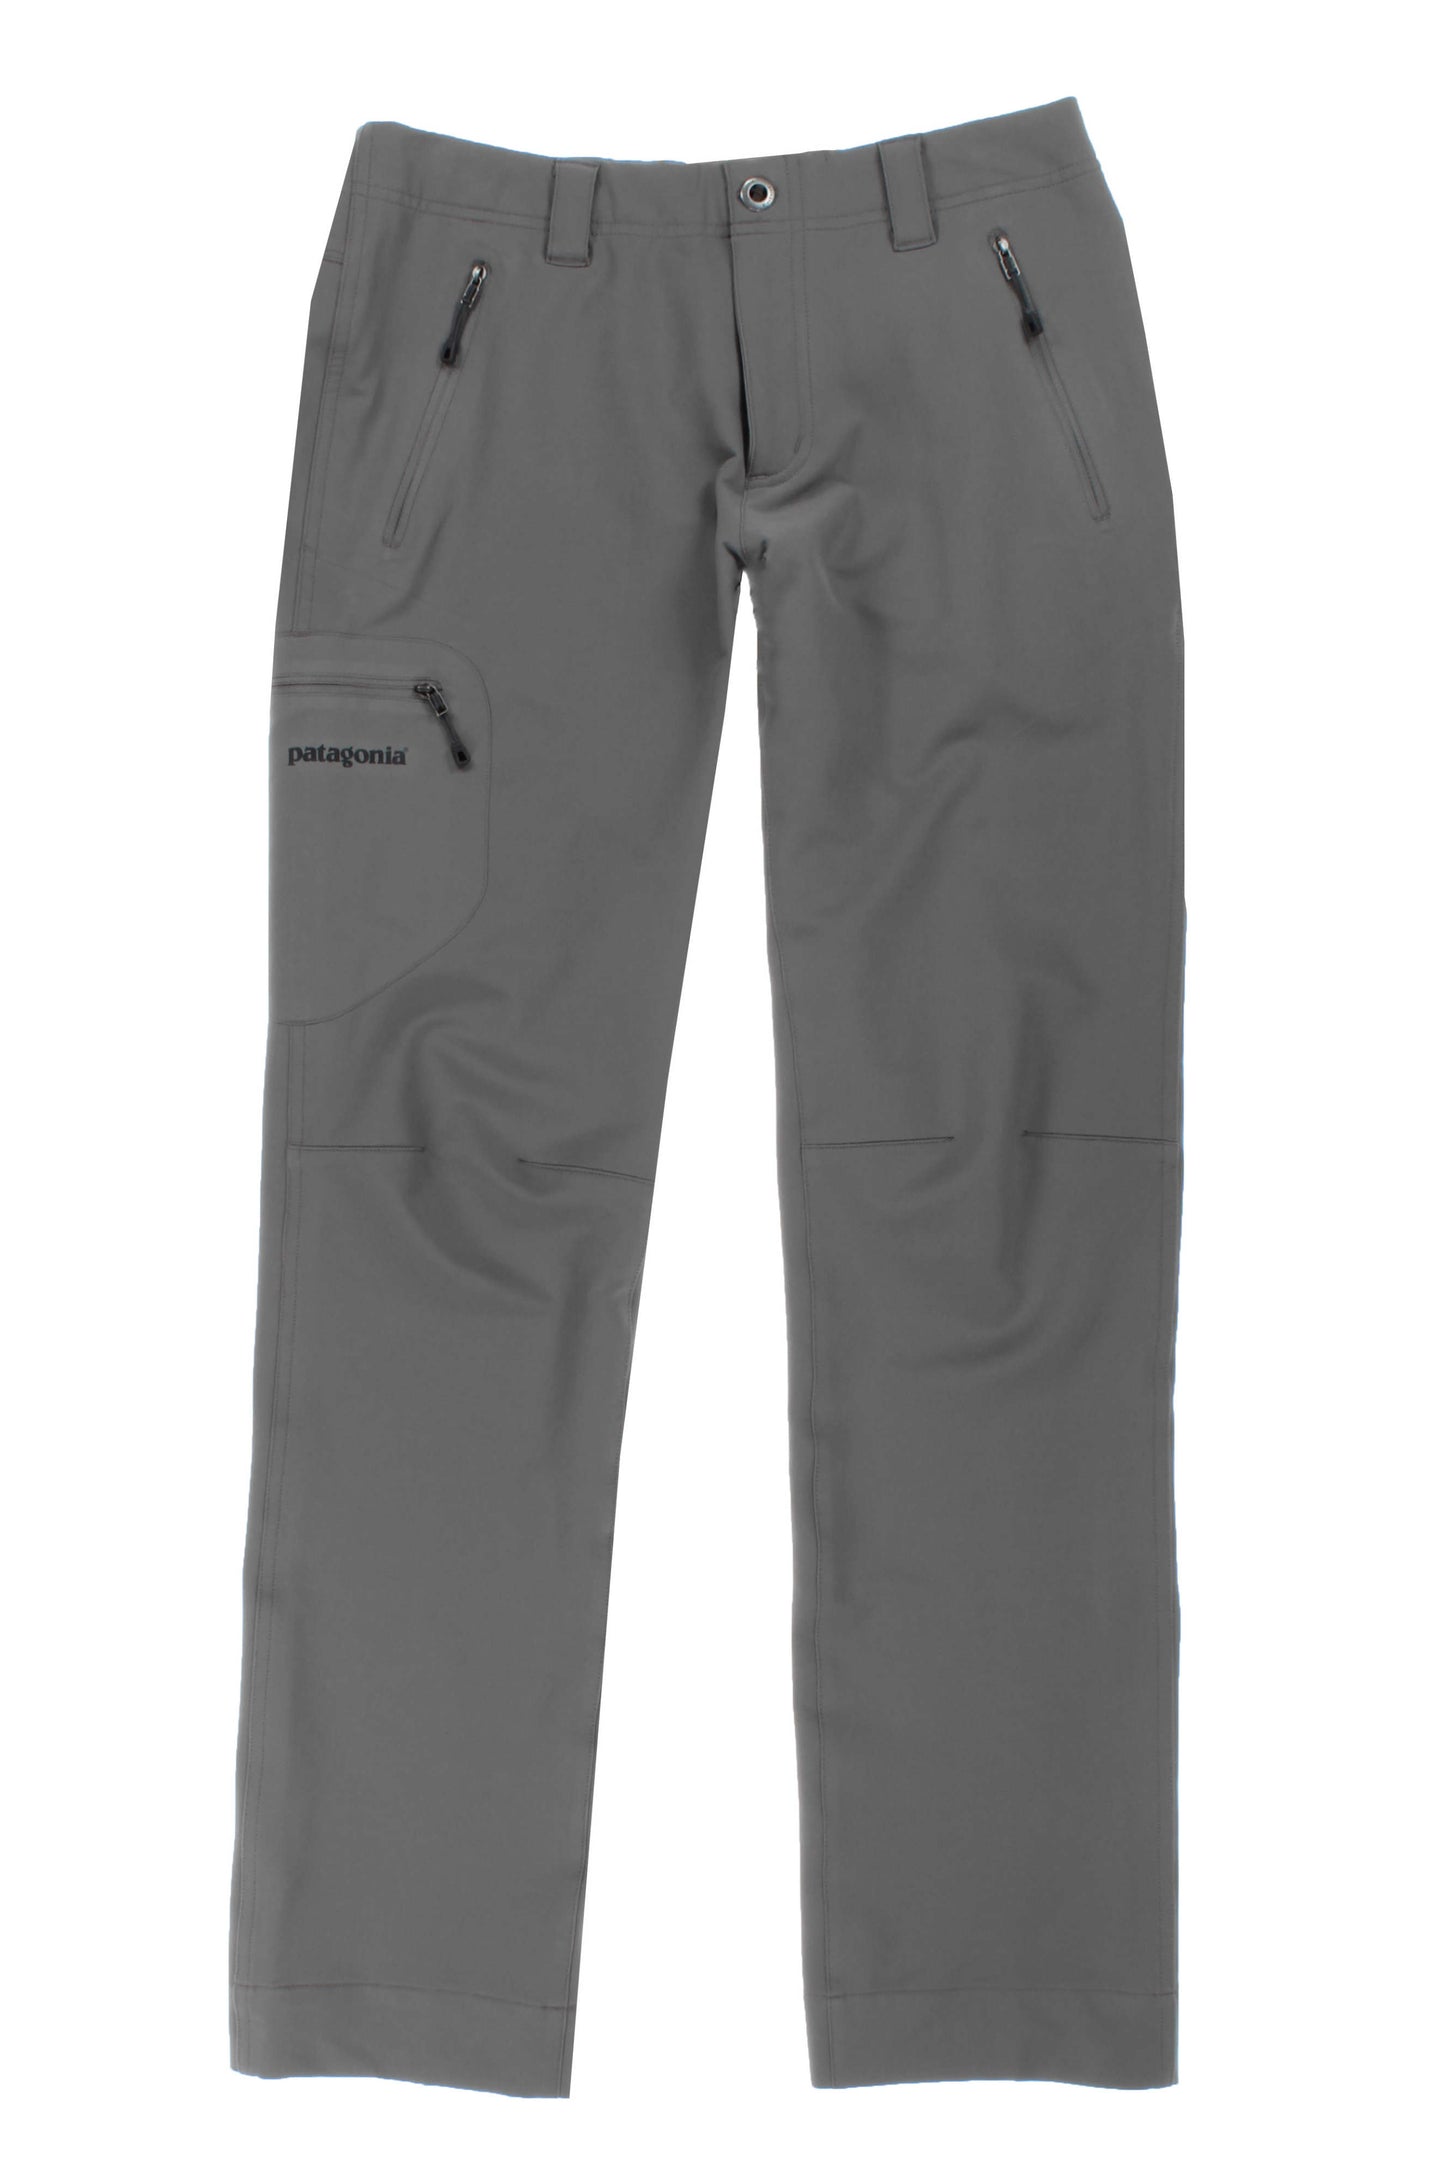 W's Simple Guide Pants